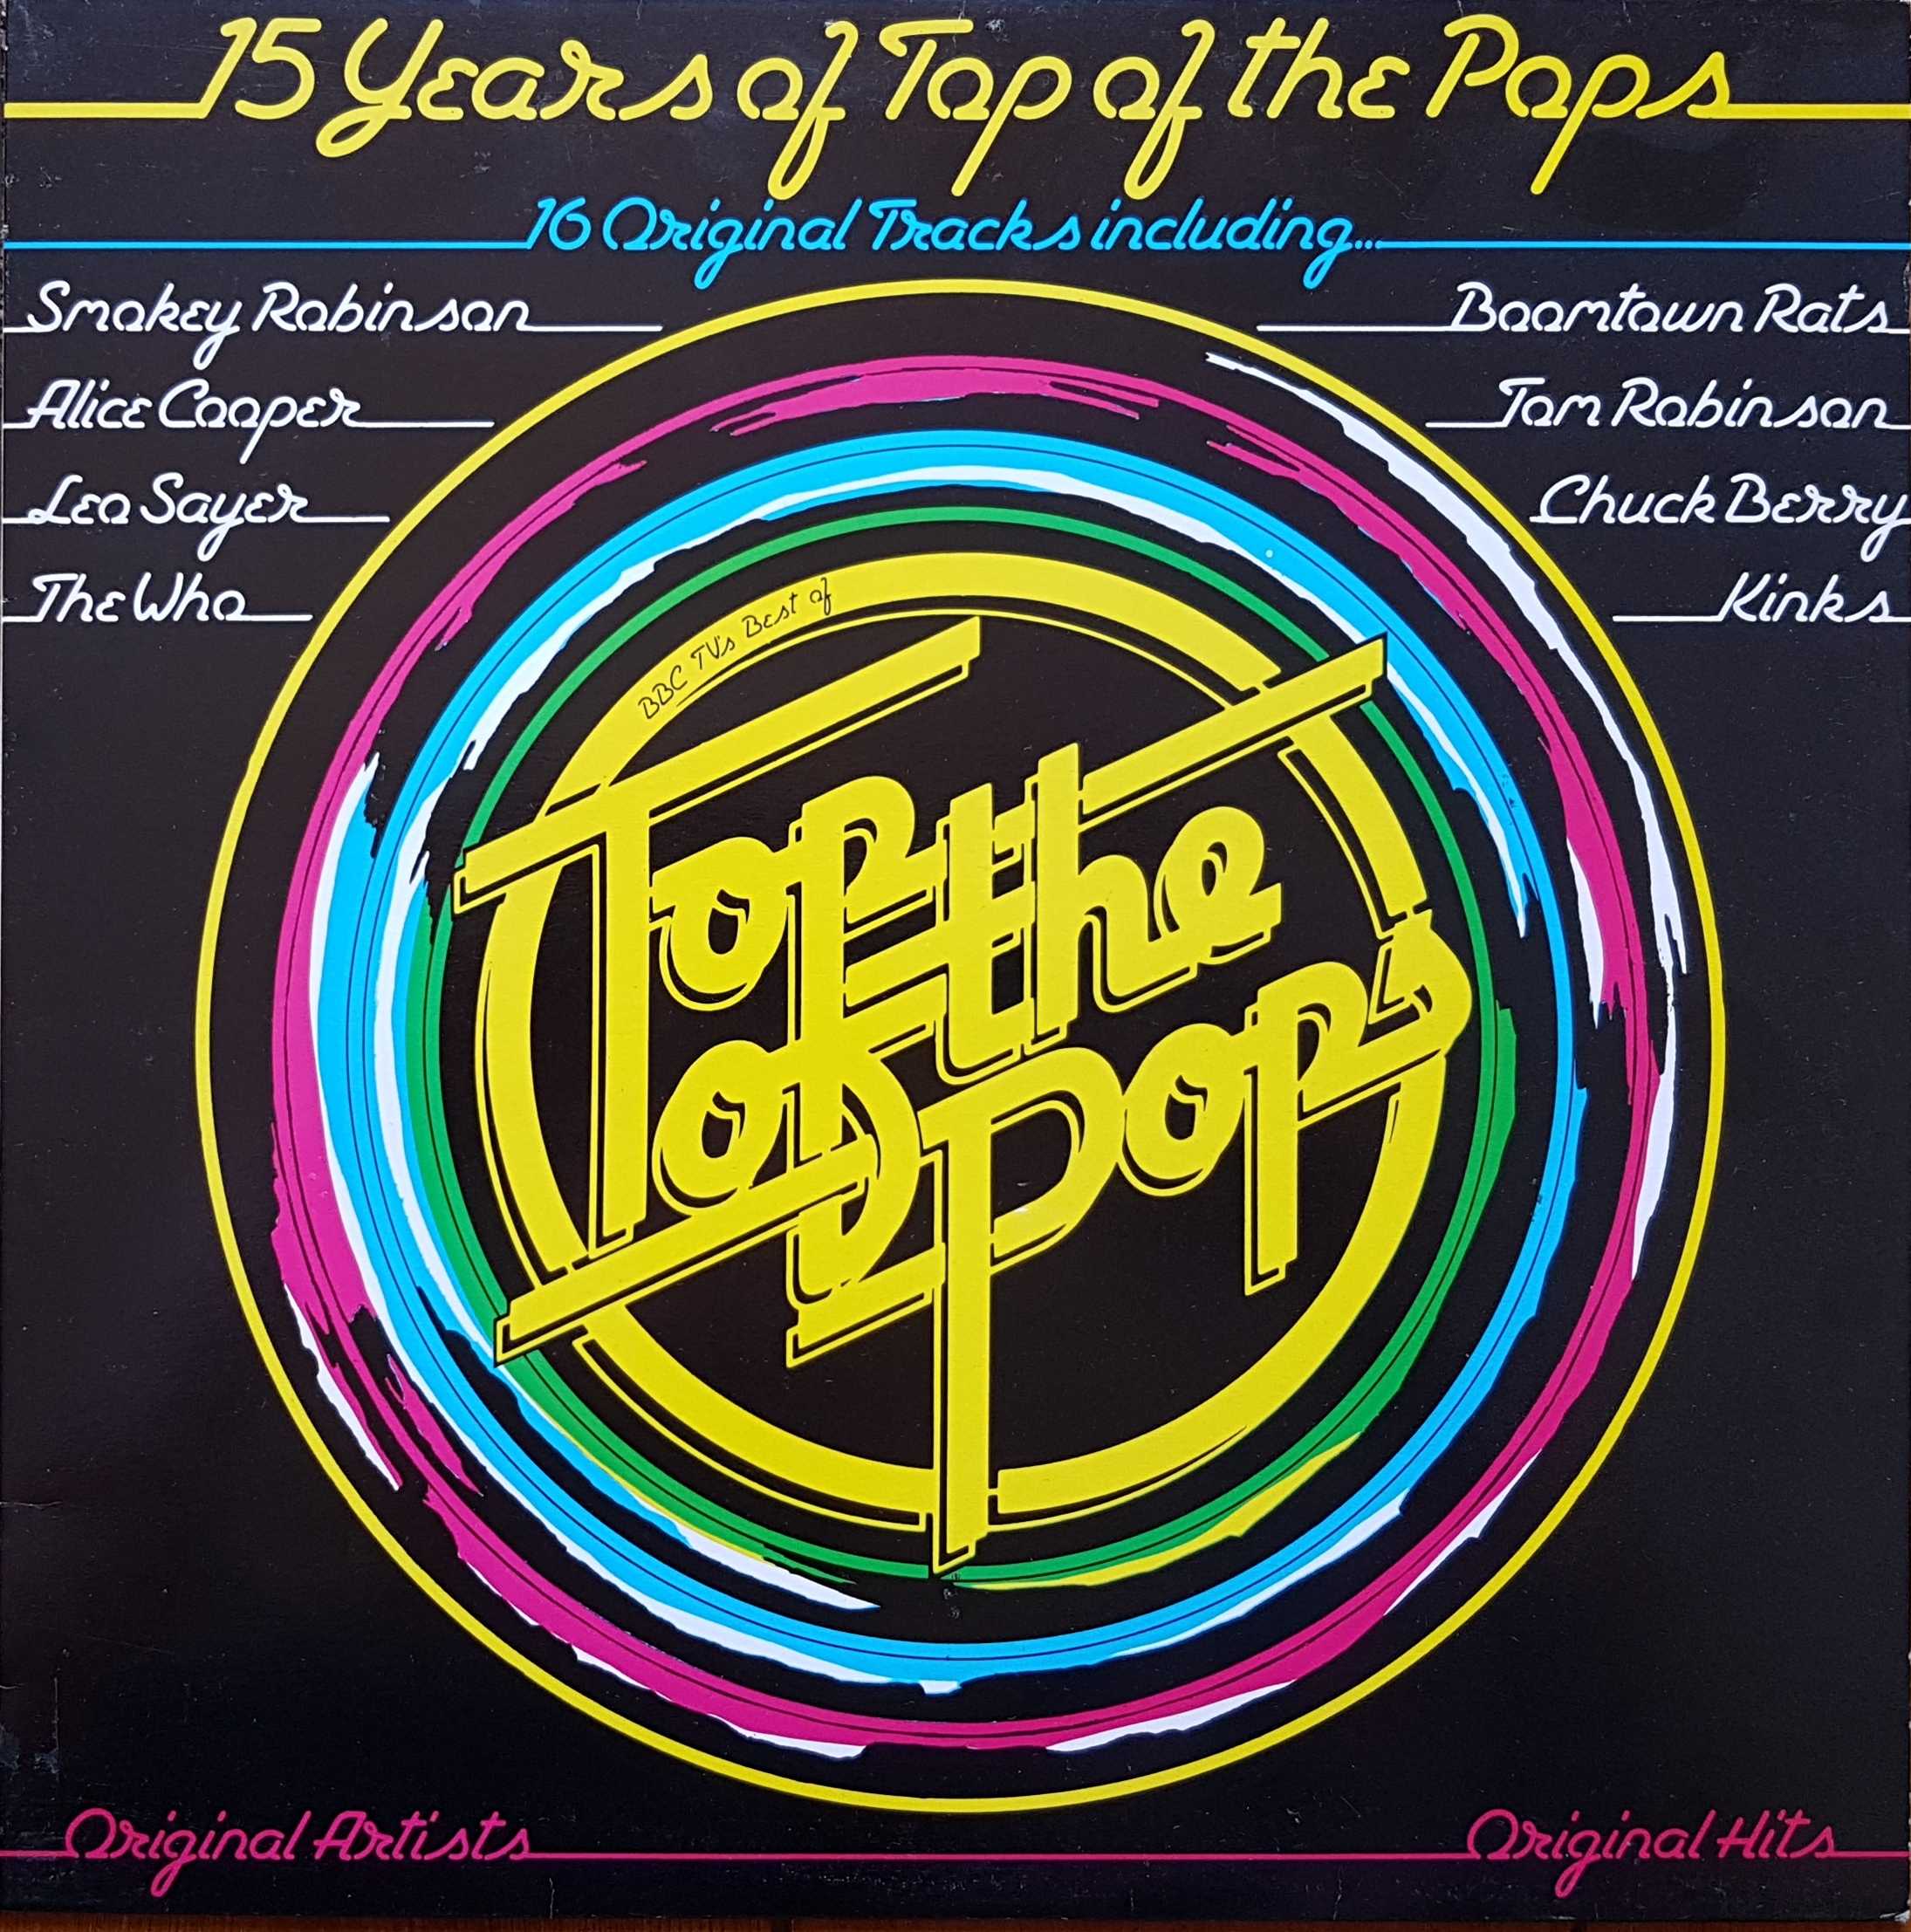 Picture of 15 years of top of the pops (Top of the pops volume 7) by artist Various from the BBC albums - Records and Tapes library